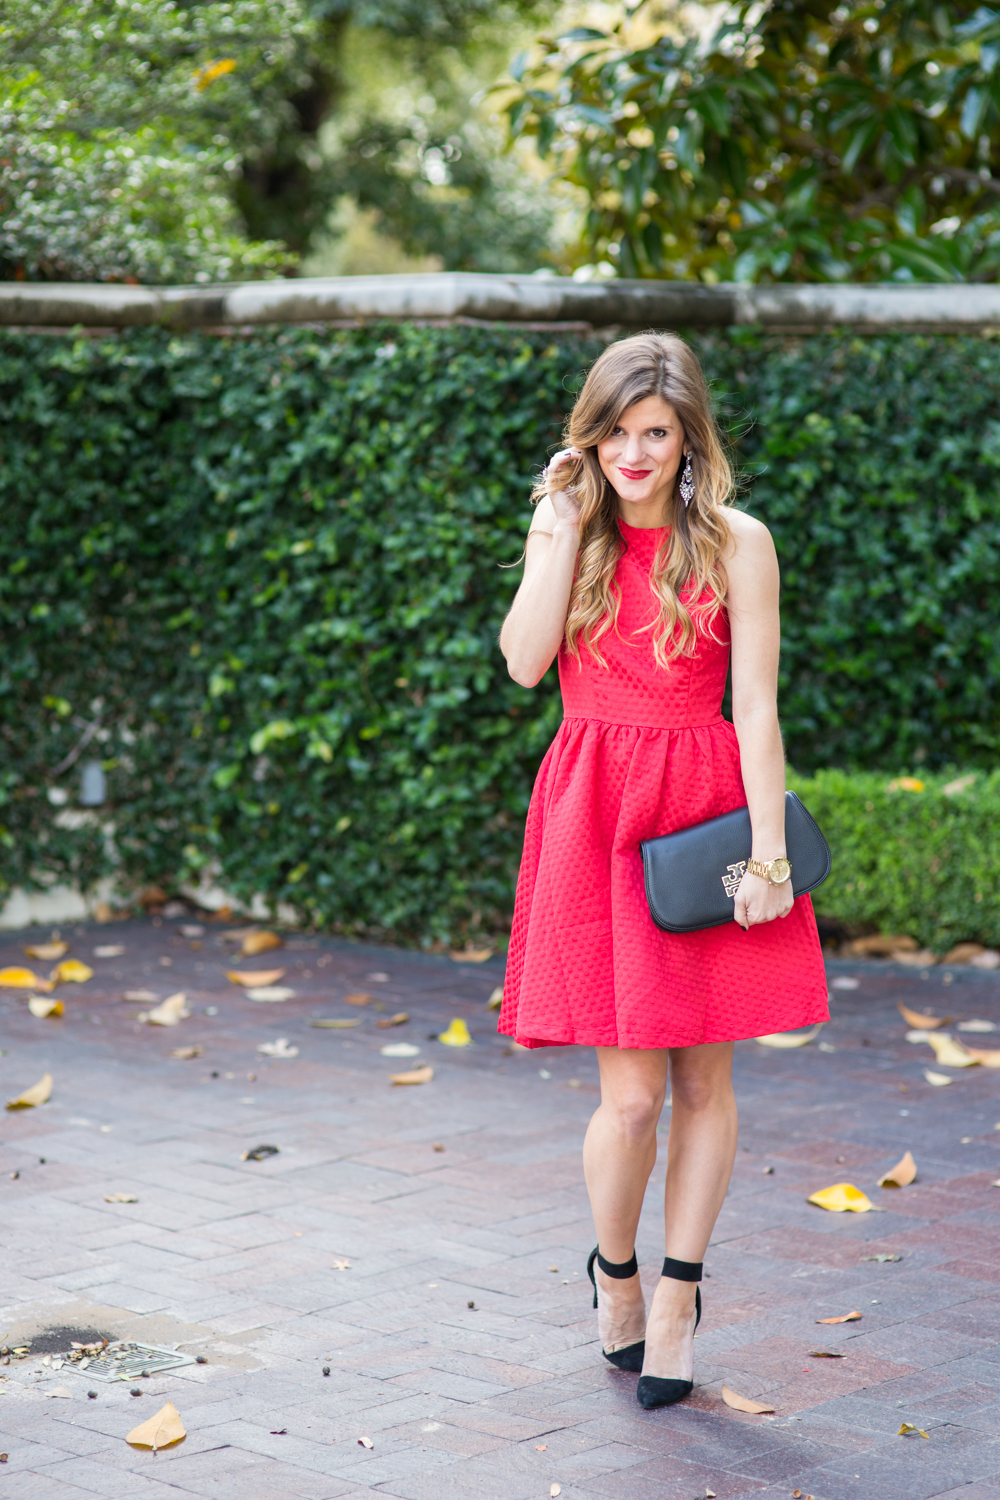 Little Red Dress - What to wear to a holiday party - festive holiday party attire